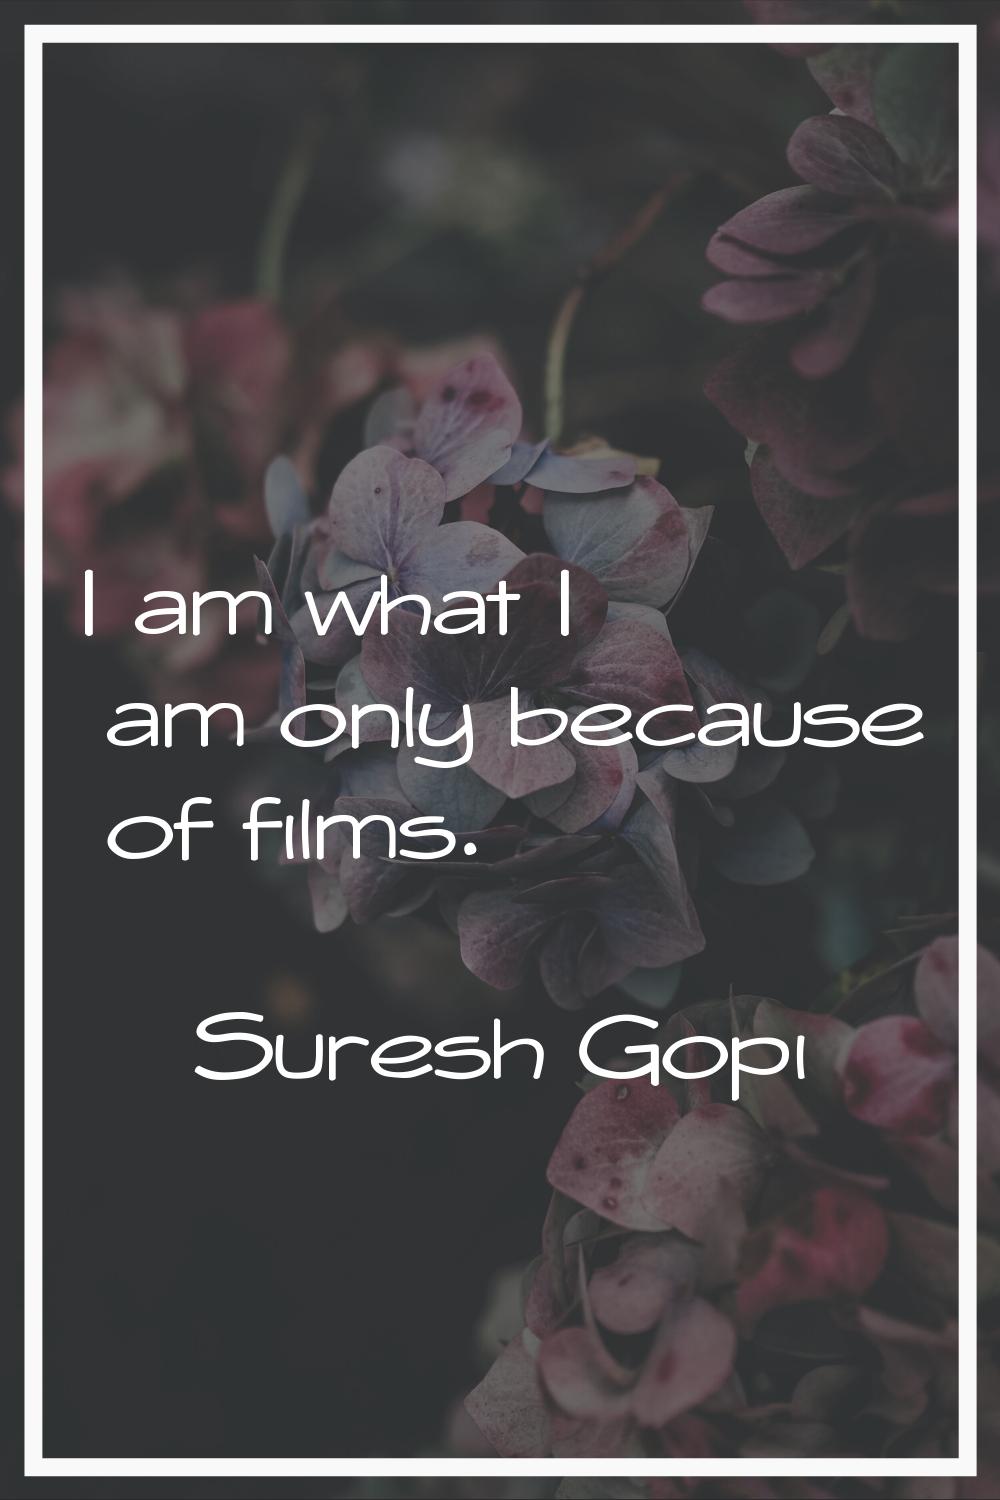 I am what I am only because of films.